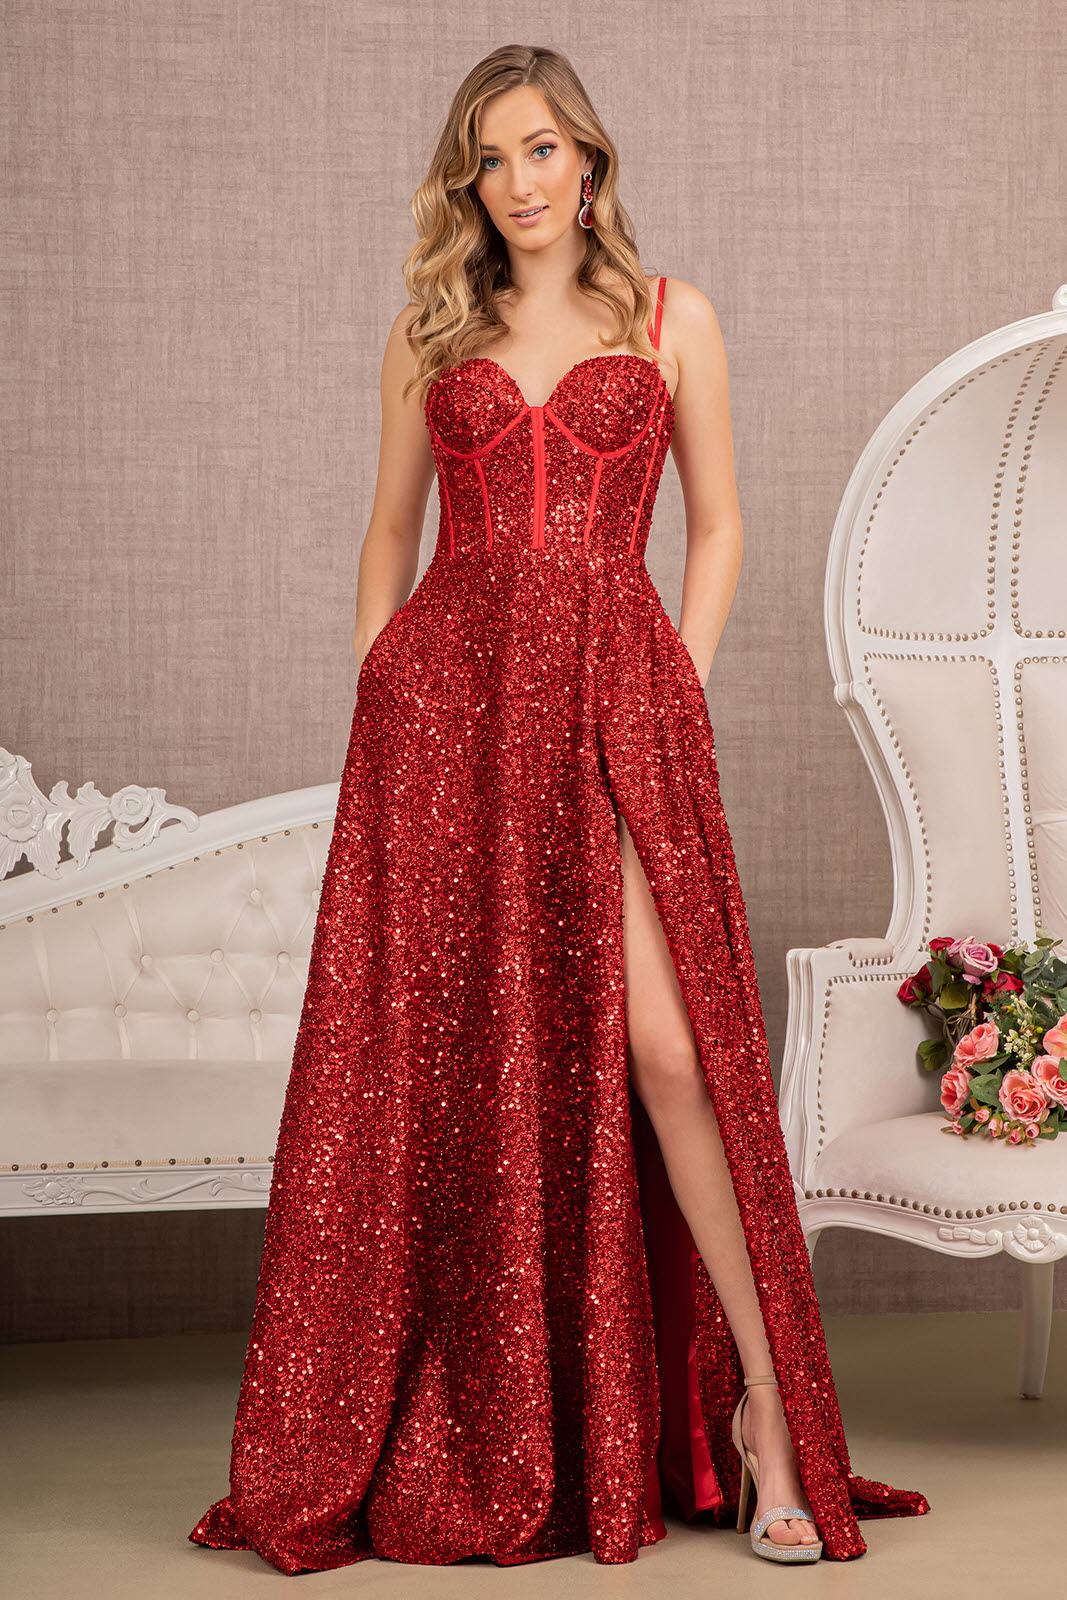 Sweetheart Lace Corset Dress With Lace-Up Back